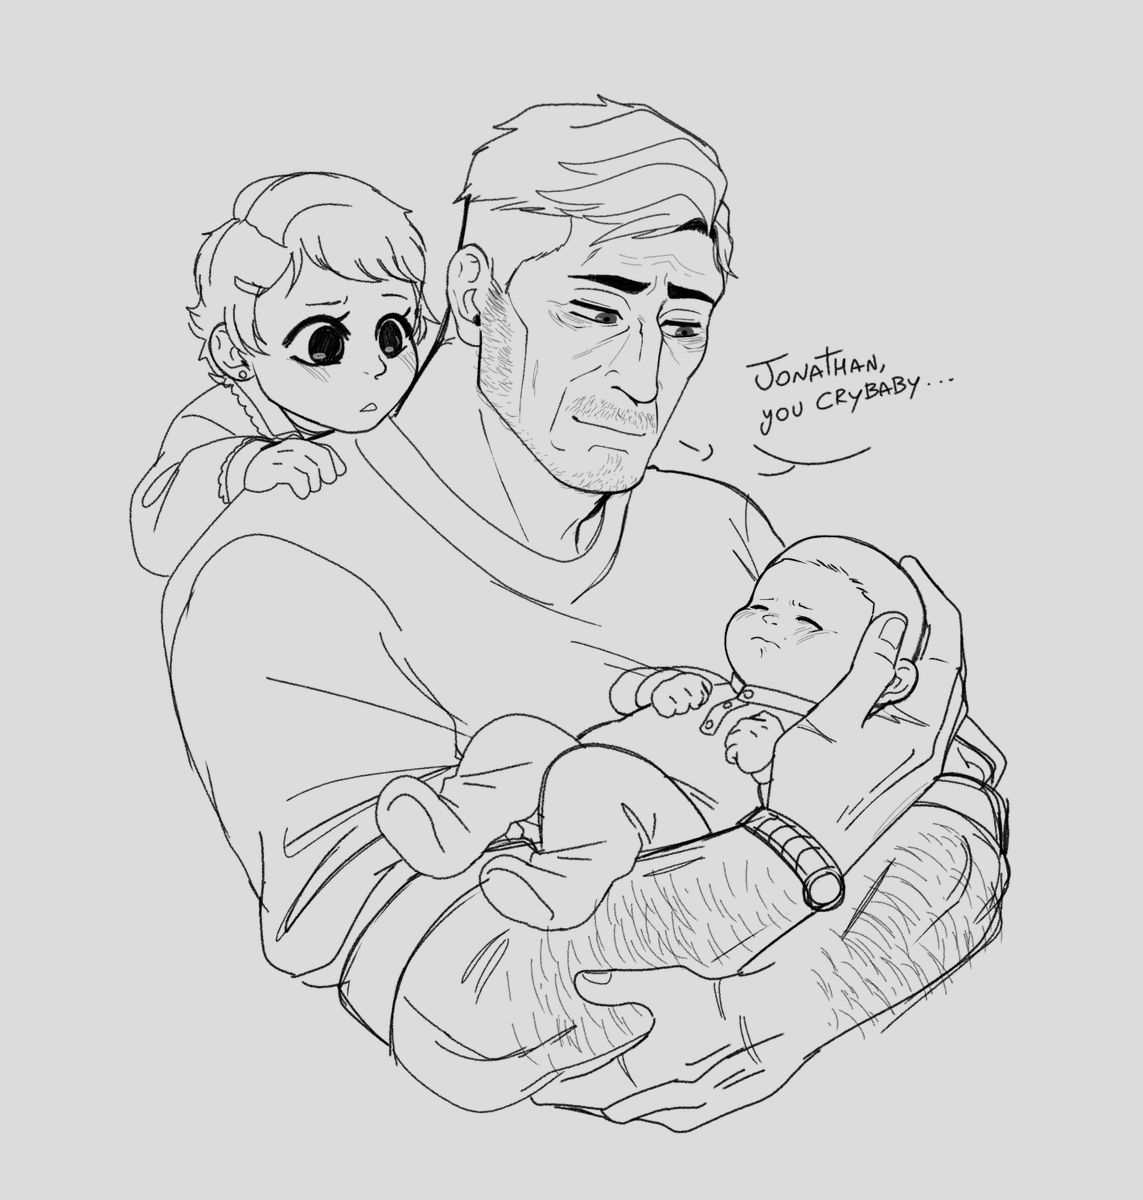 Dad!Krueger with our baby son Jonathan and our little daughter Emilie 💚💜

#krueger #kreuger #cod #selfship #fanchild